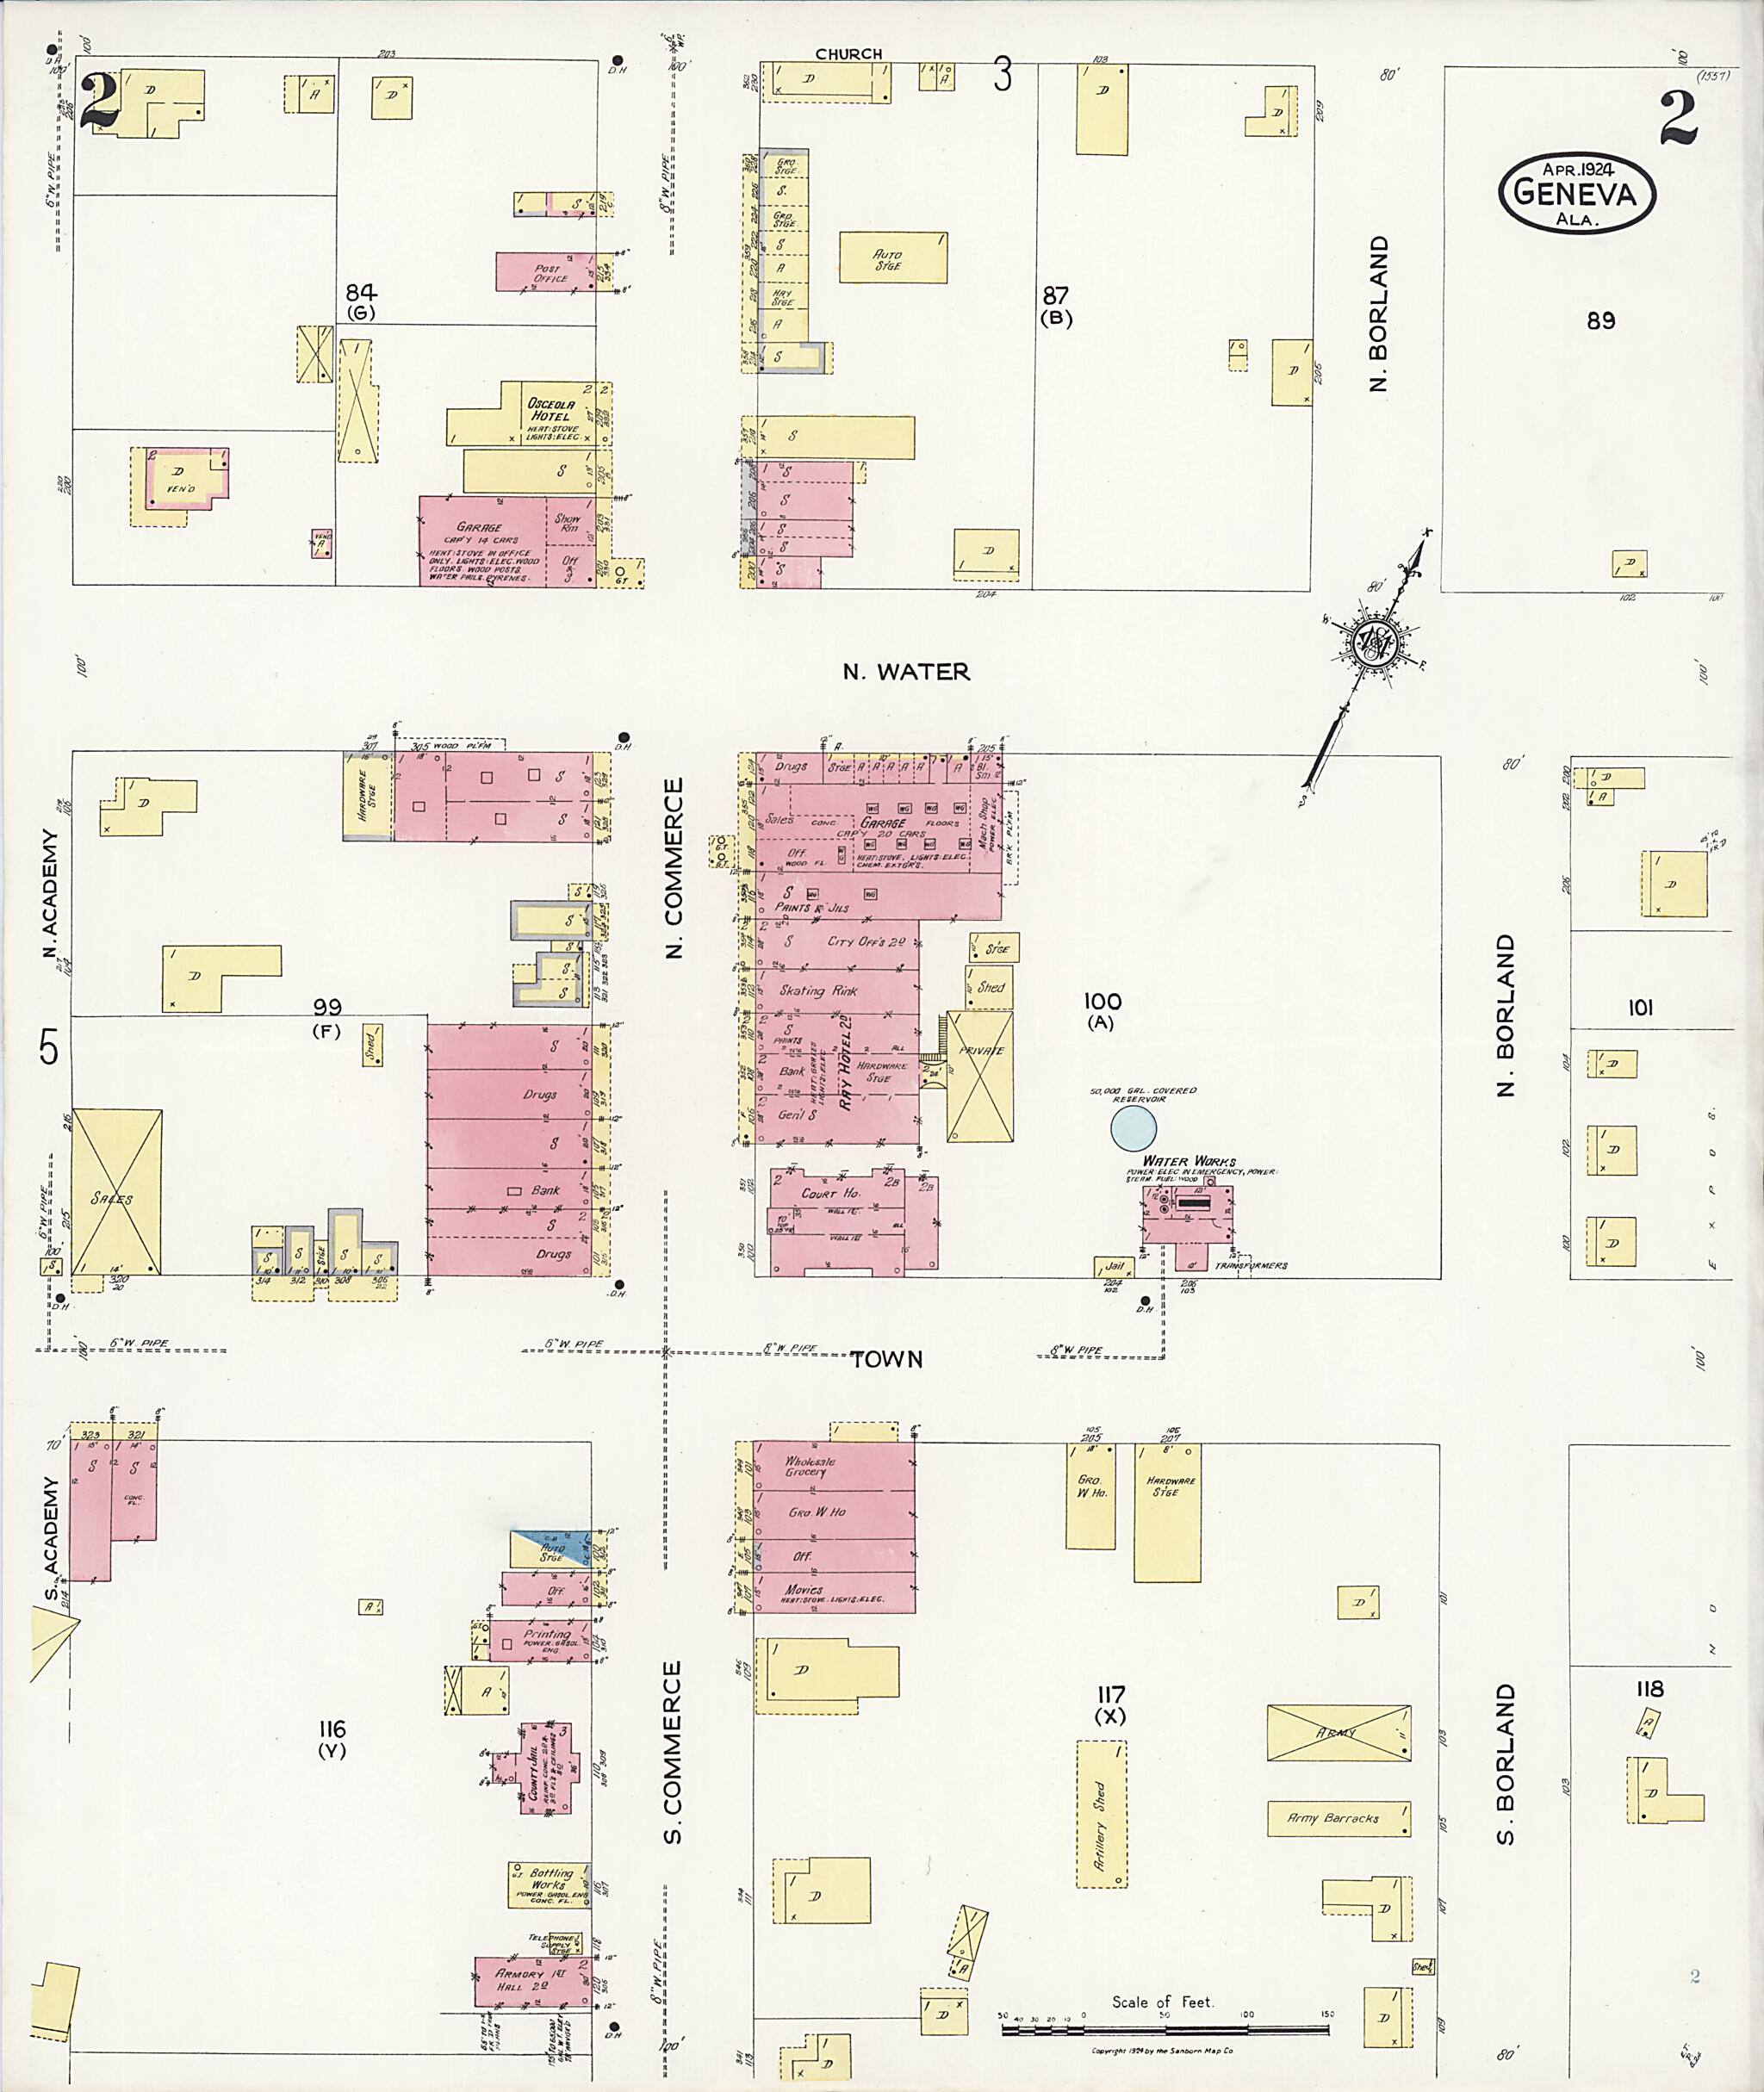 This old map of Geneva, Geneva County, Alabama was created by Sanborn Map Company in 1924